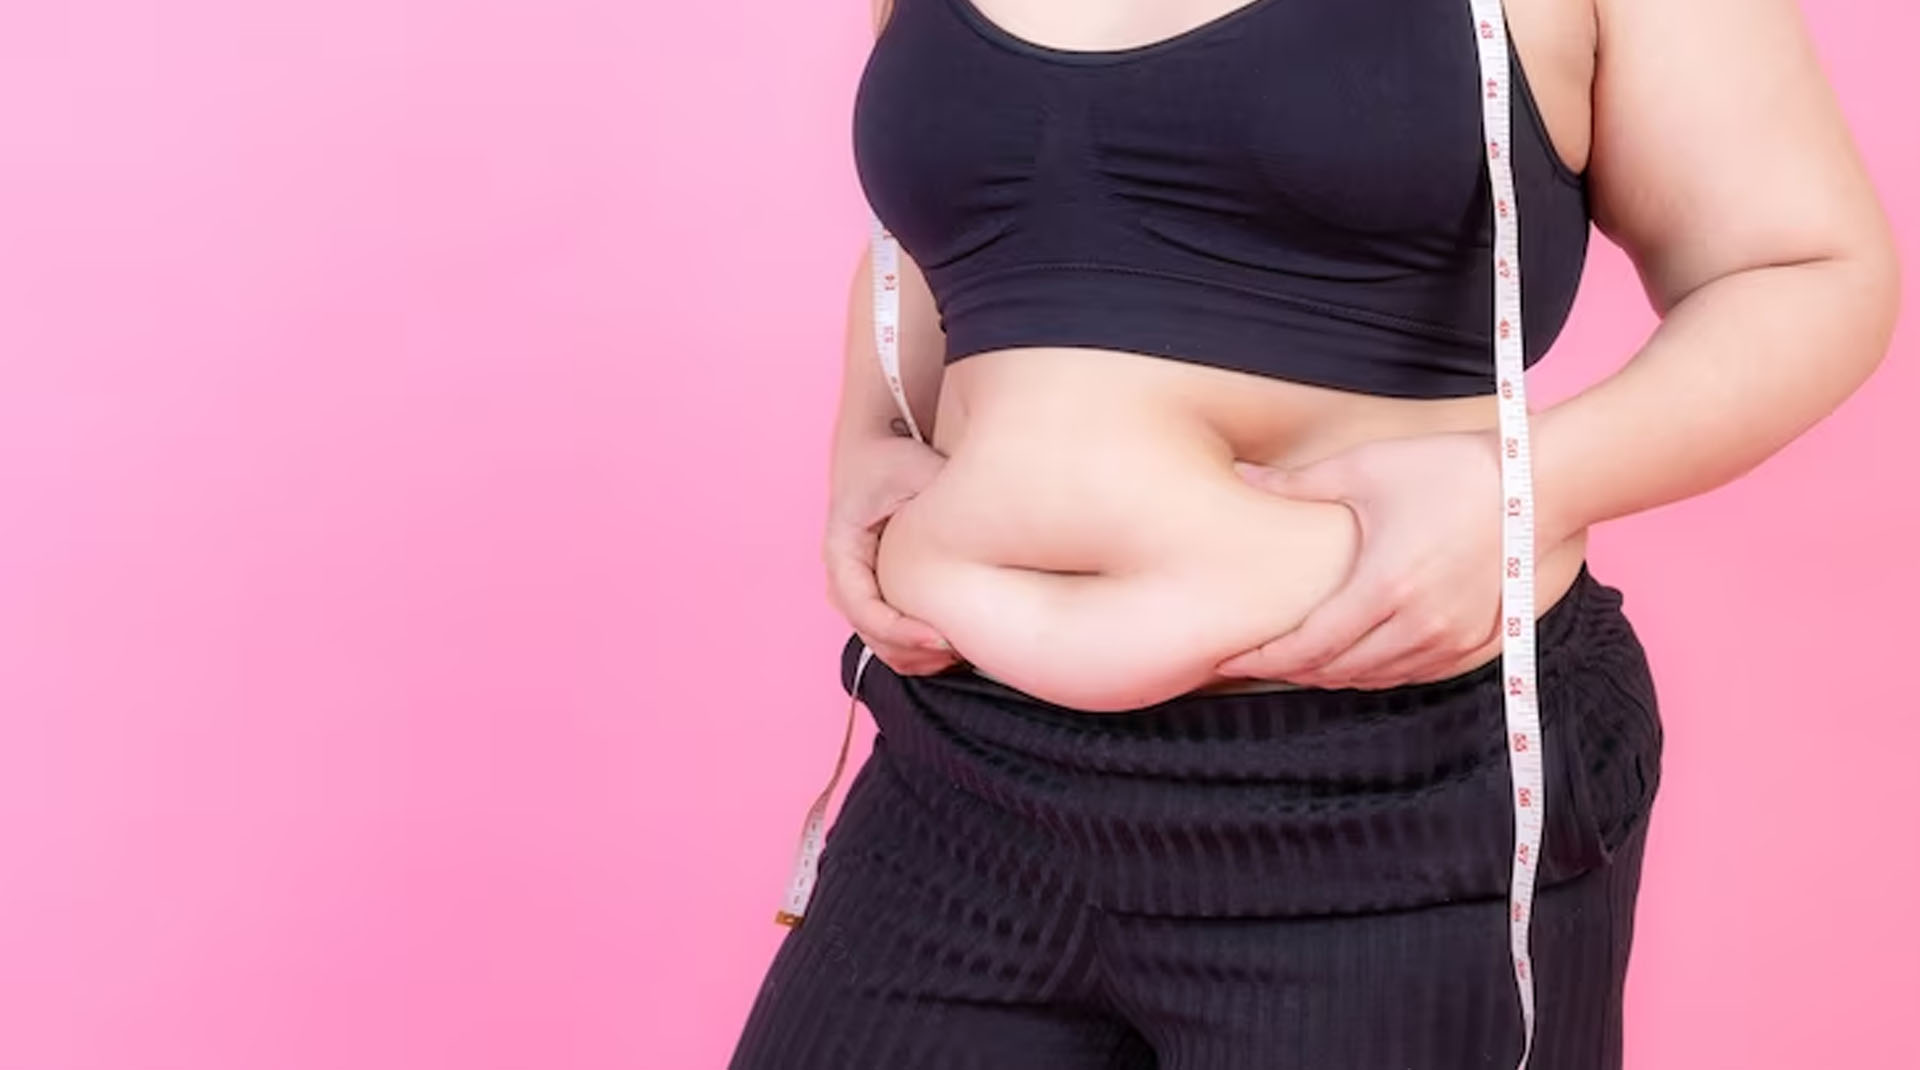 What are the Home Remedies to reduce Belly Fat?